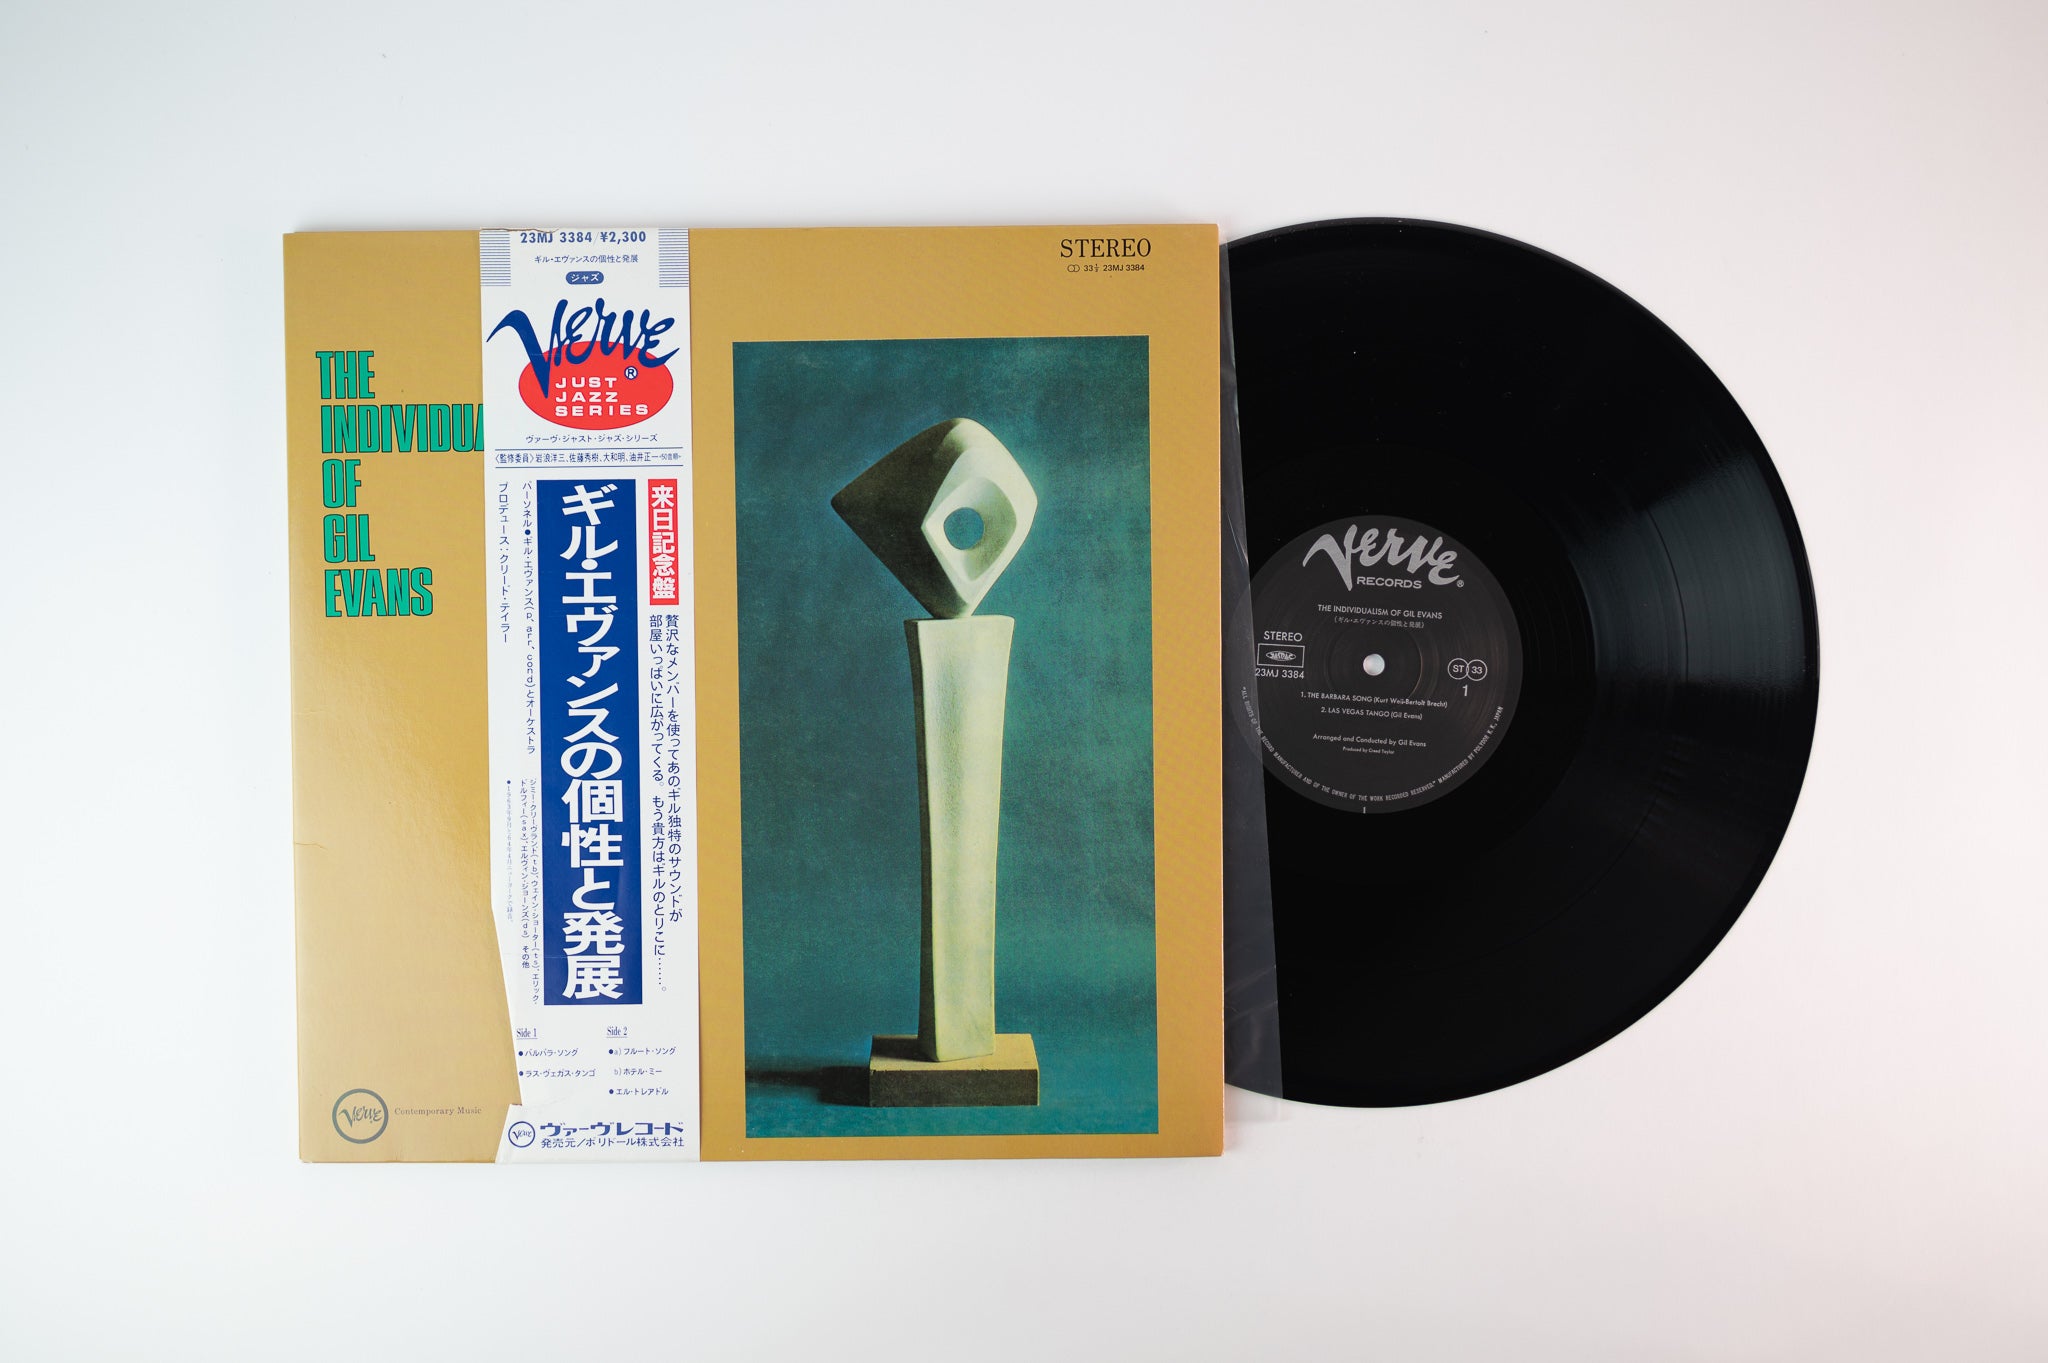 Gil Evans - The Individualism Of Gil Evans on Verve Japanese Reissue with Obi Strip